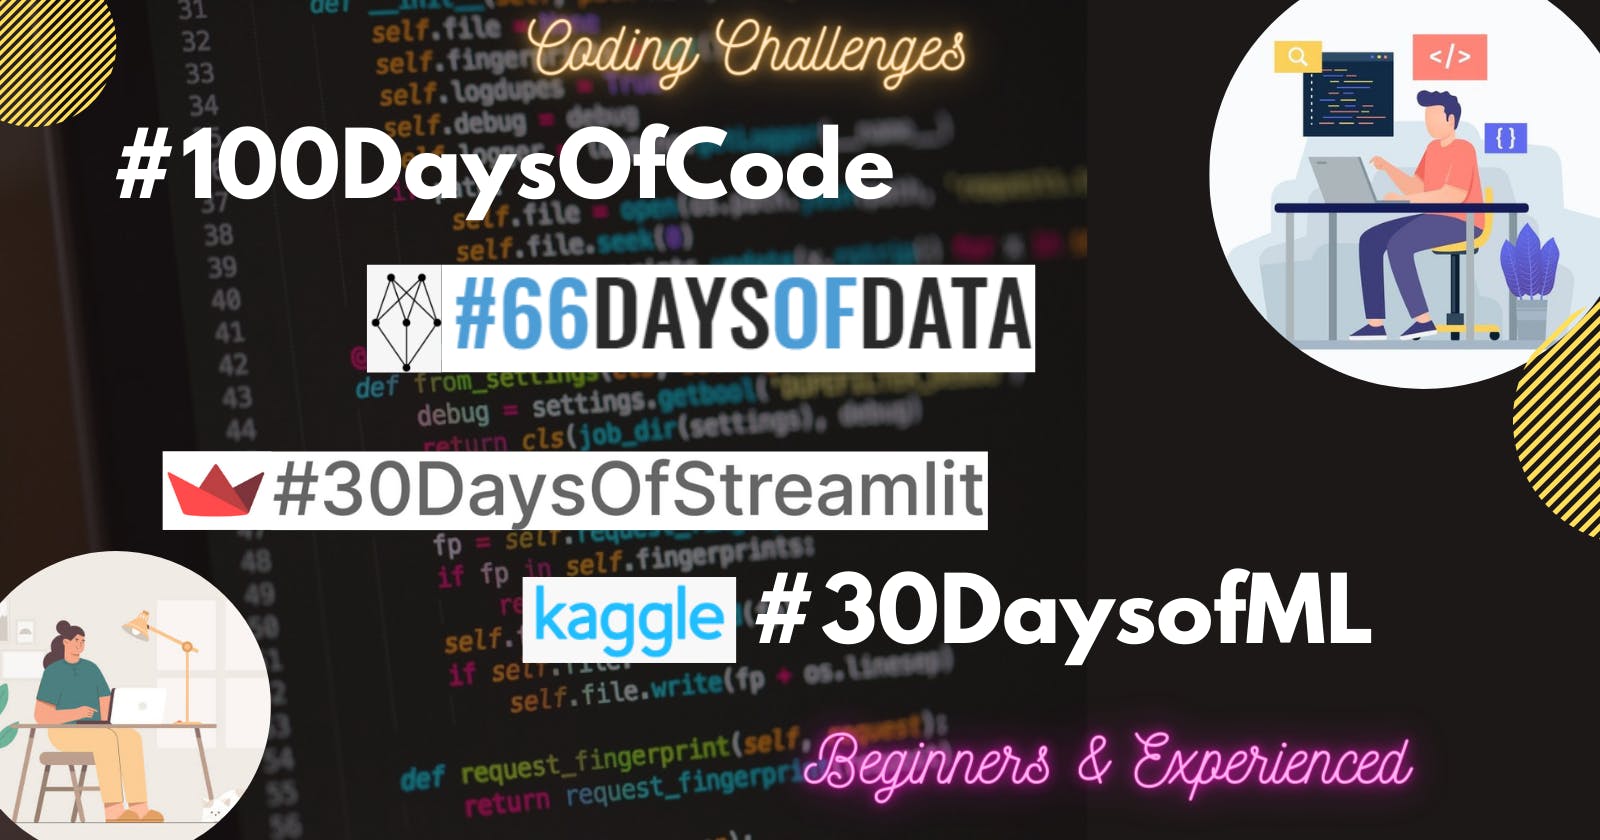 Coding challenges are not just 100 days of code!